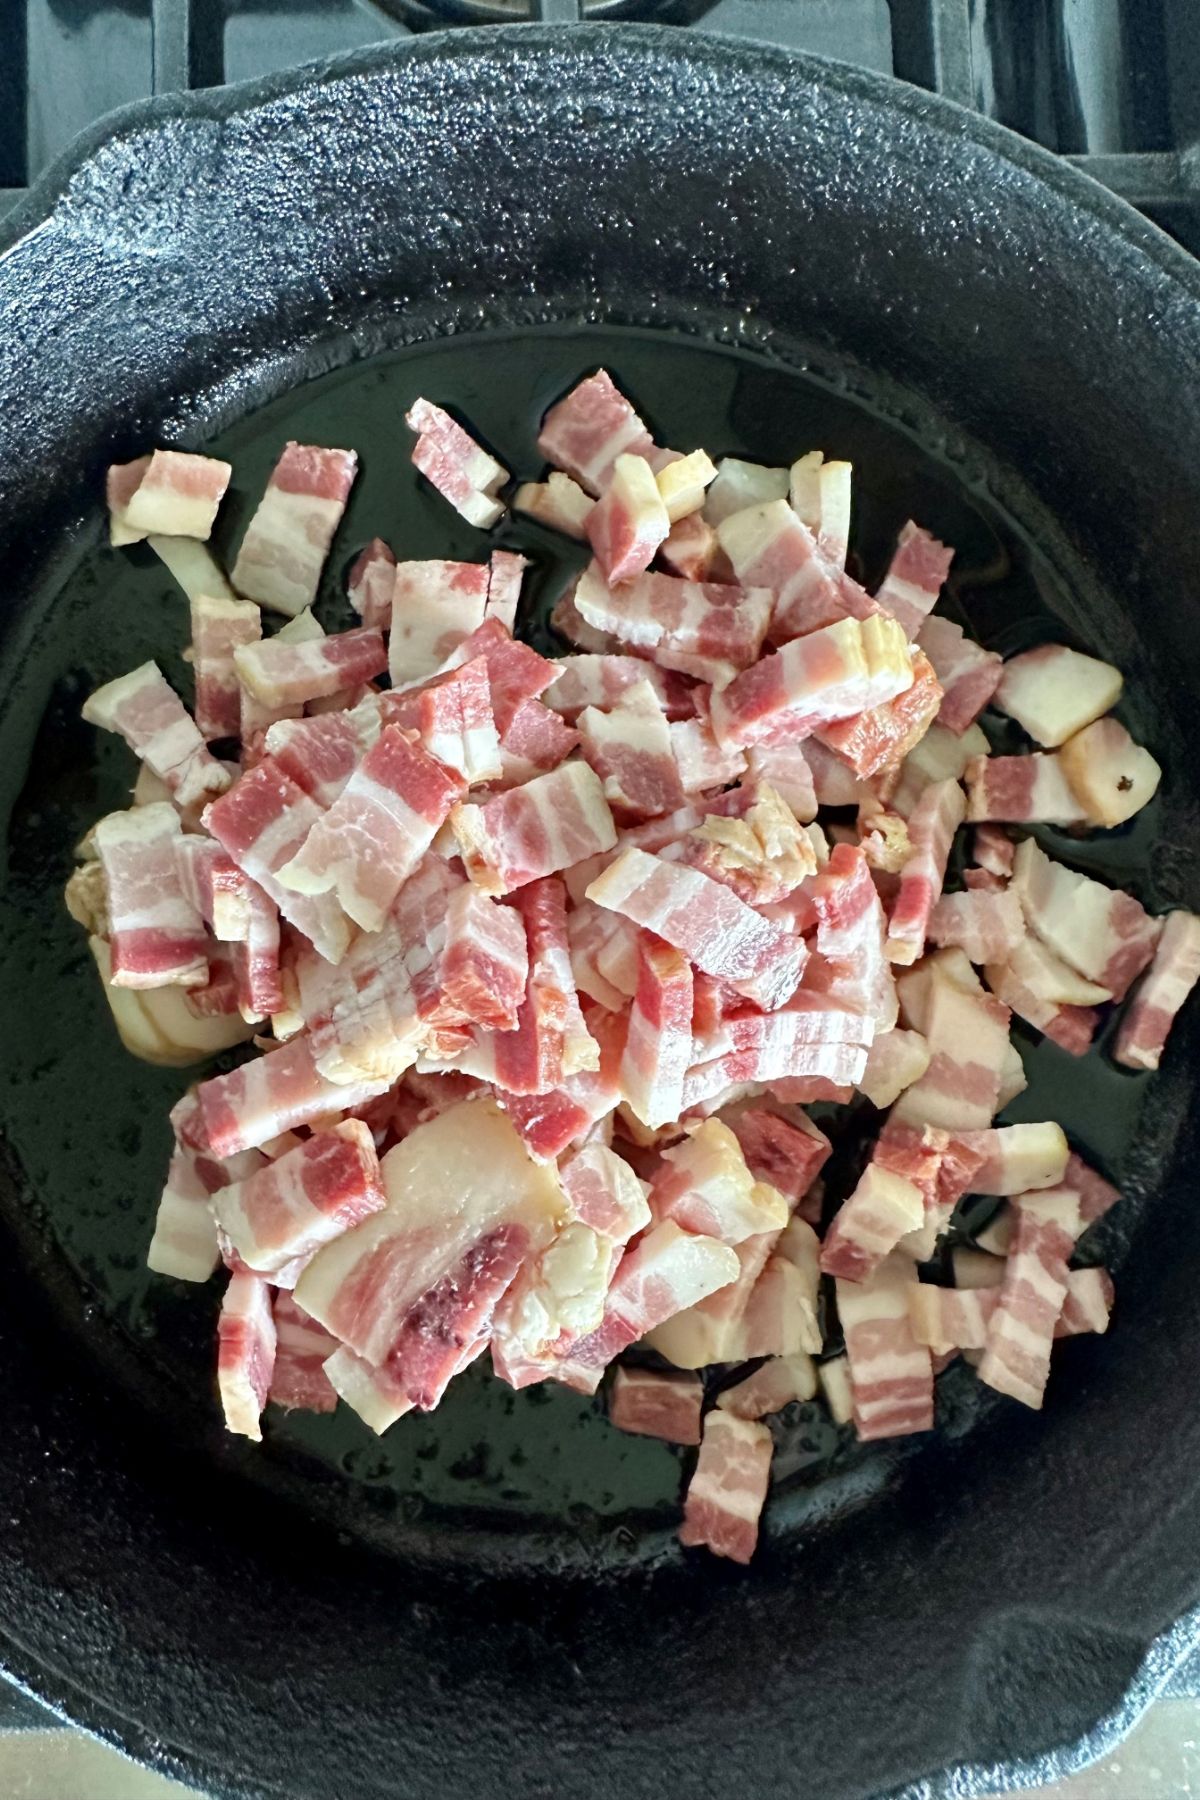 Raw diced bacon in a pan.